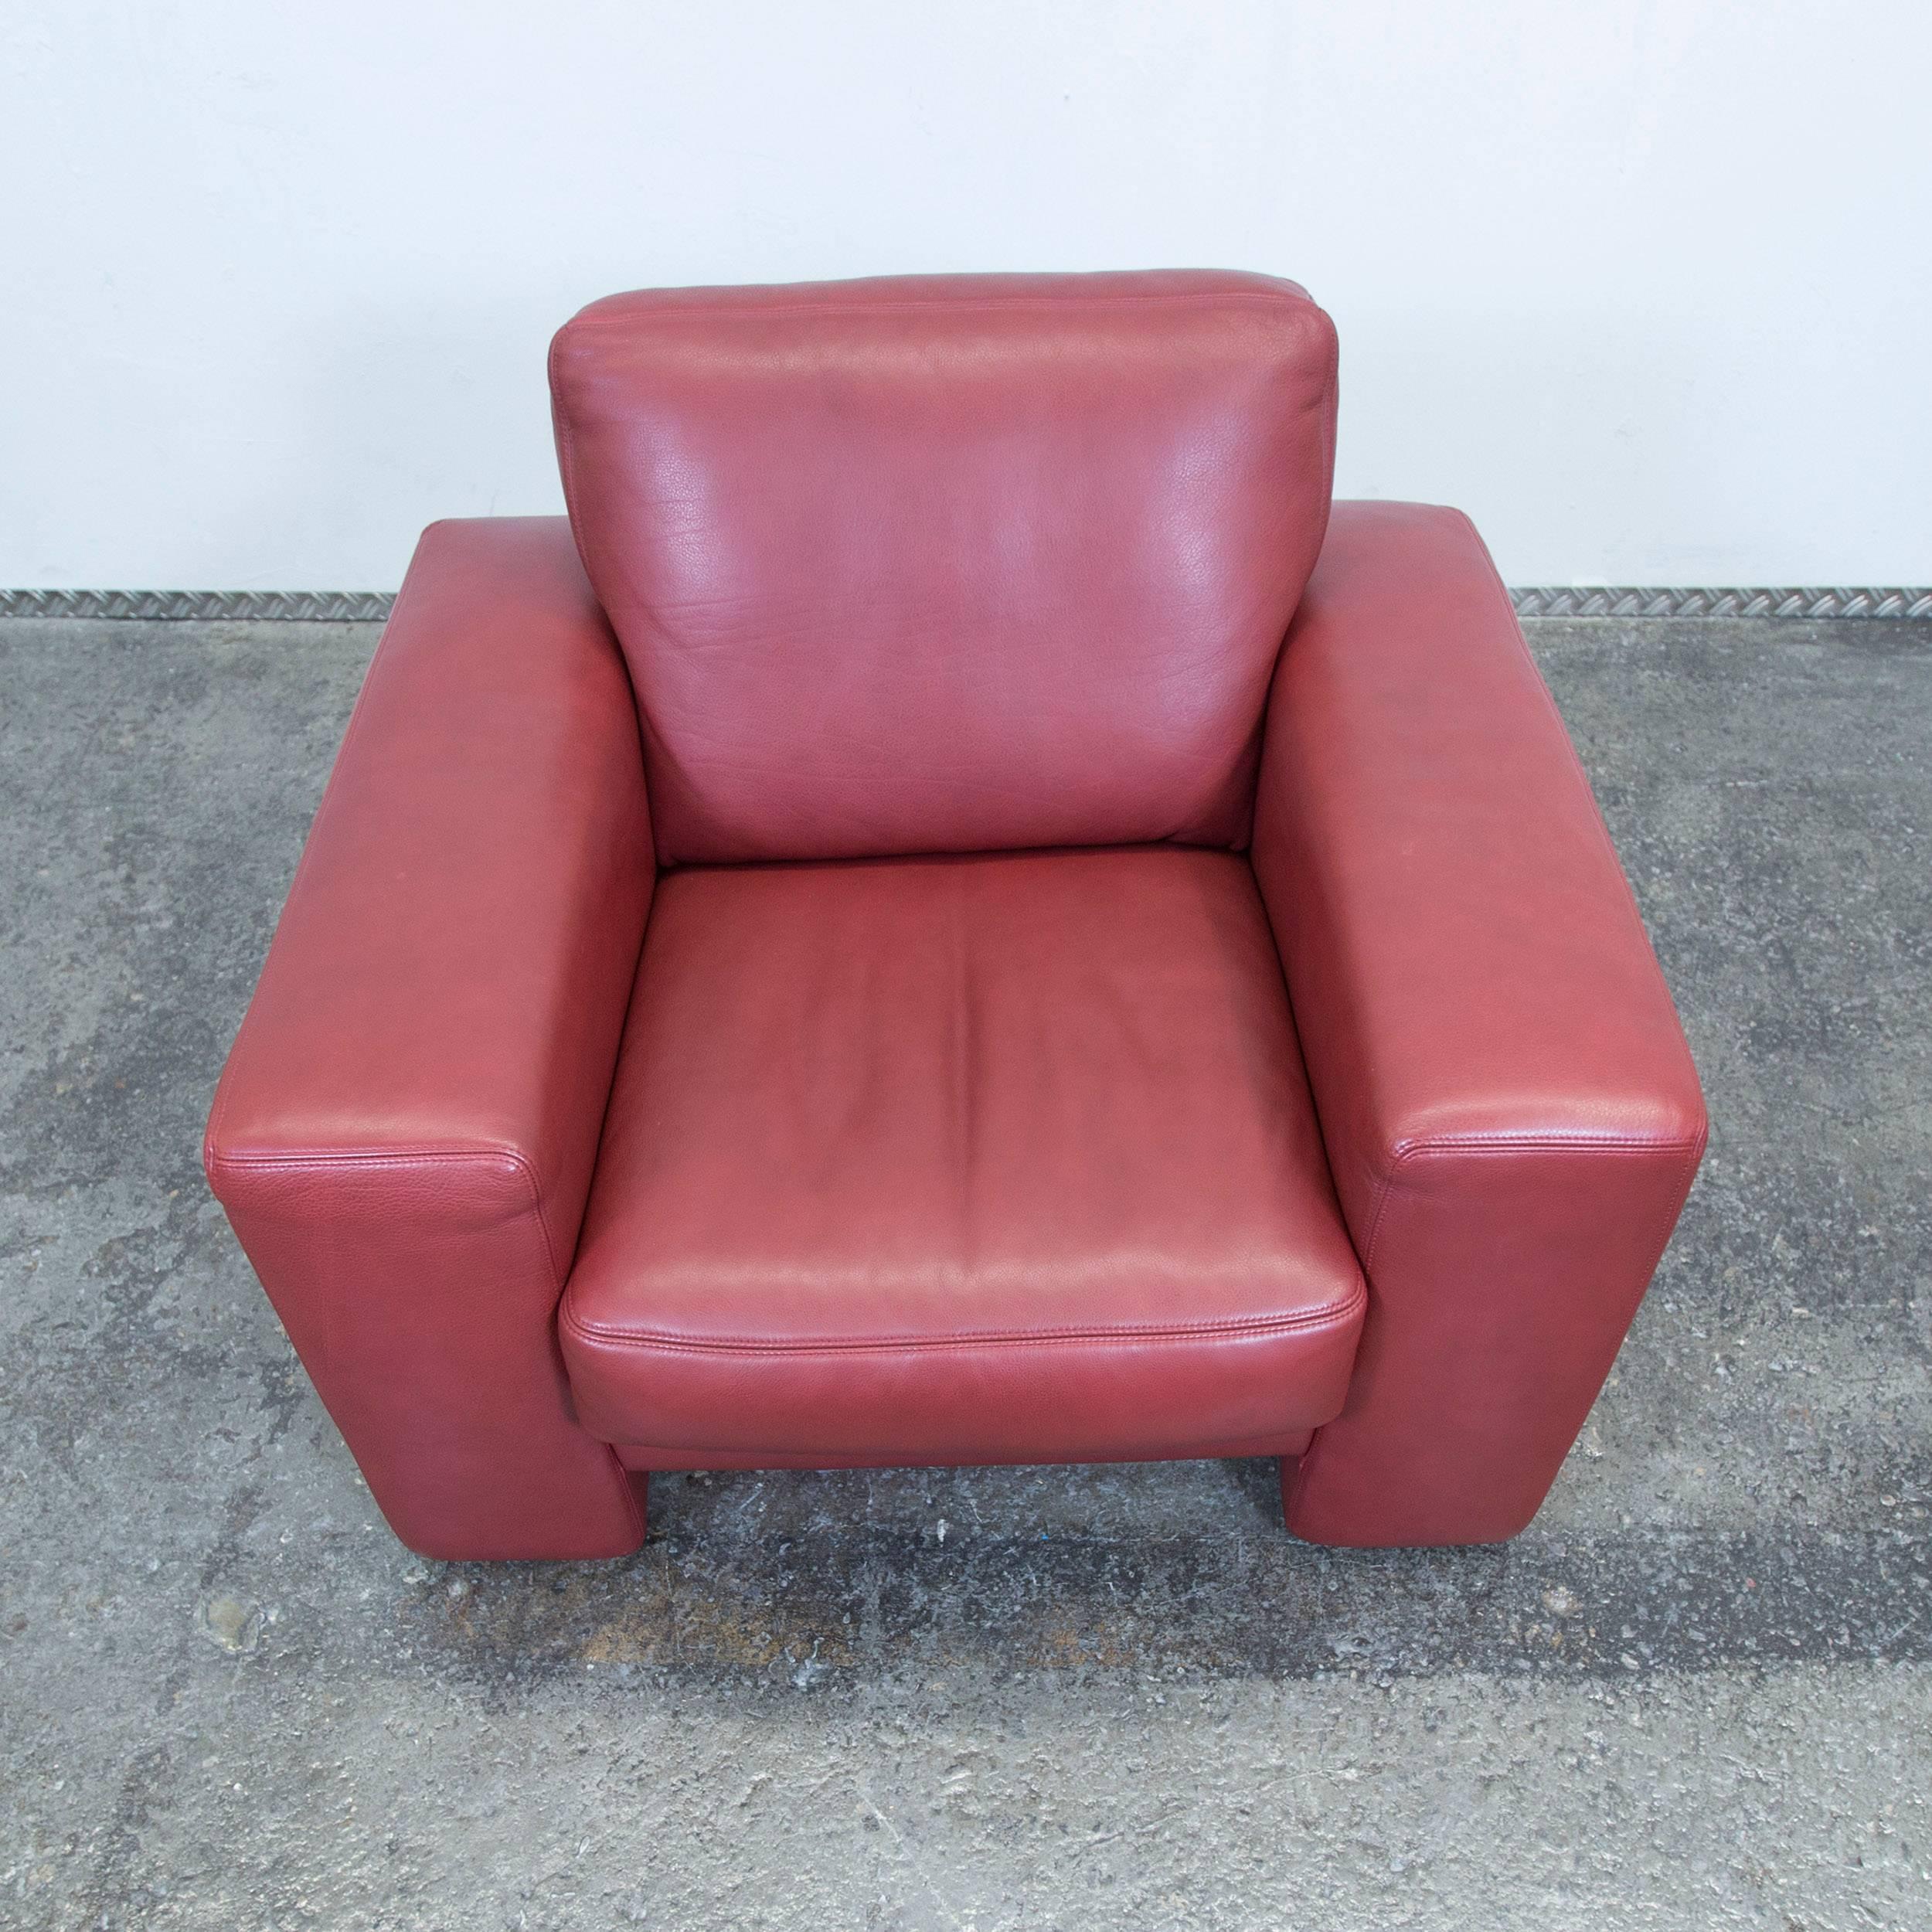 Red colored original Koinor designer leather armchair in a modern and minimalistic style, designed for pure comfort.